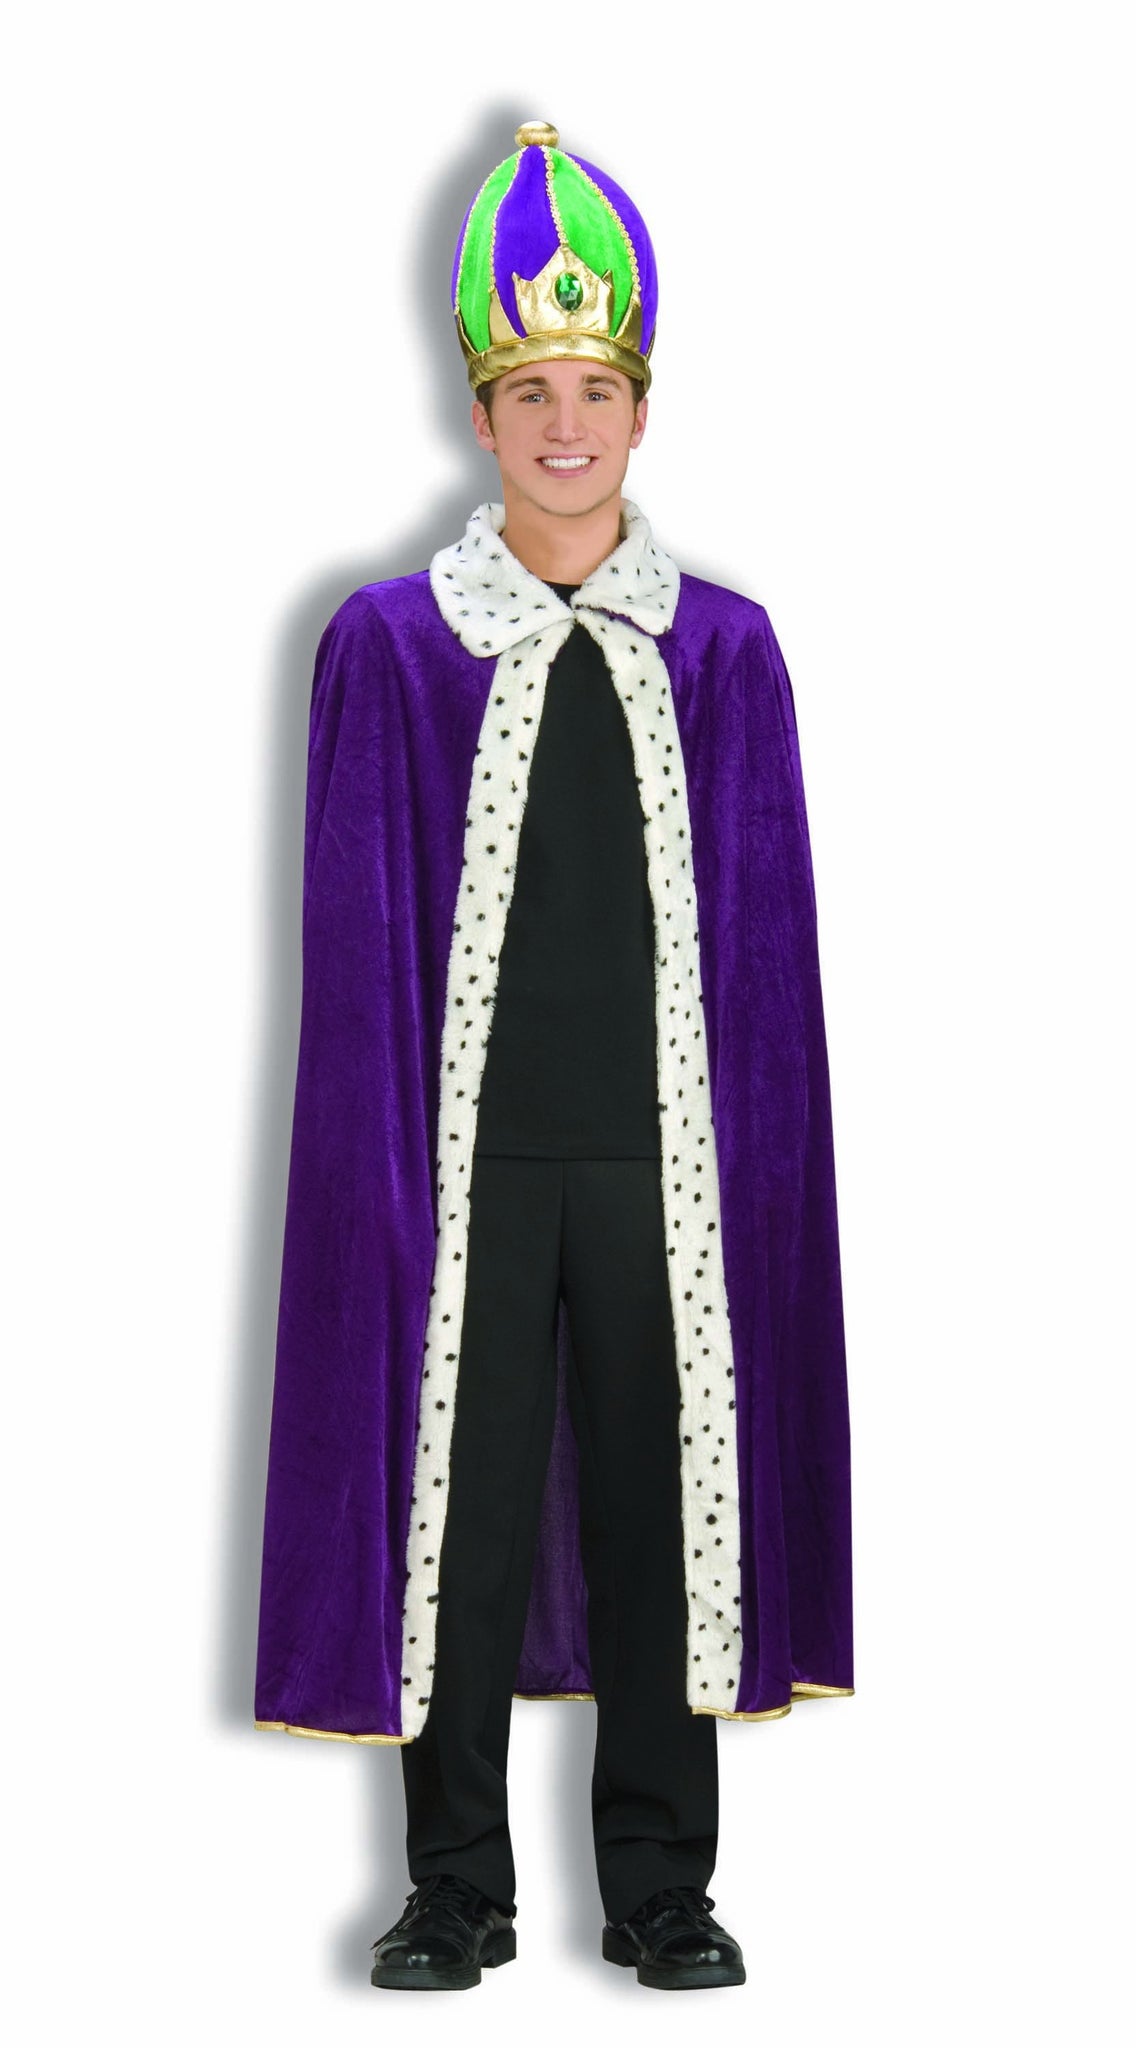 Purple robe, faux fur trimmed in white with black spots